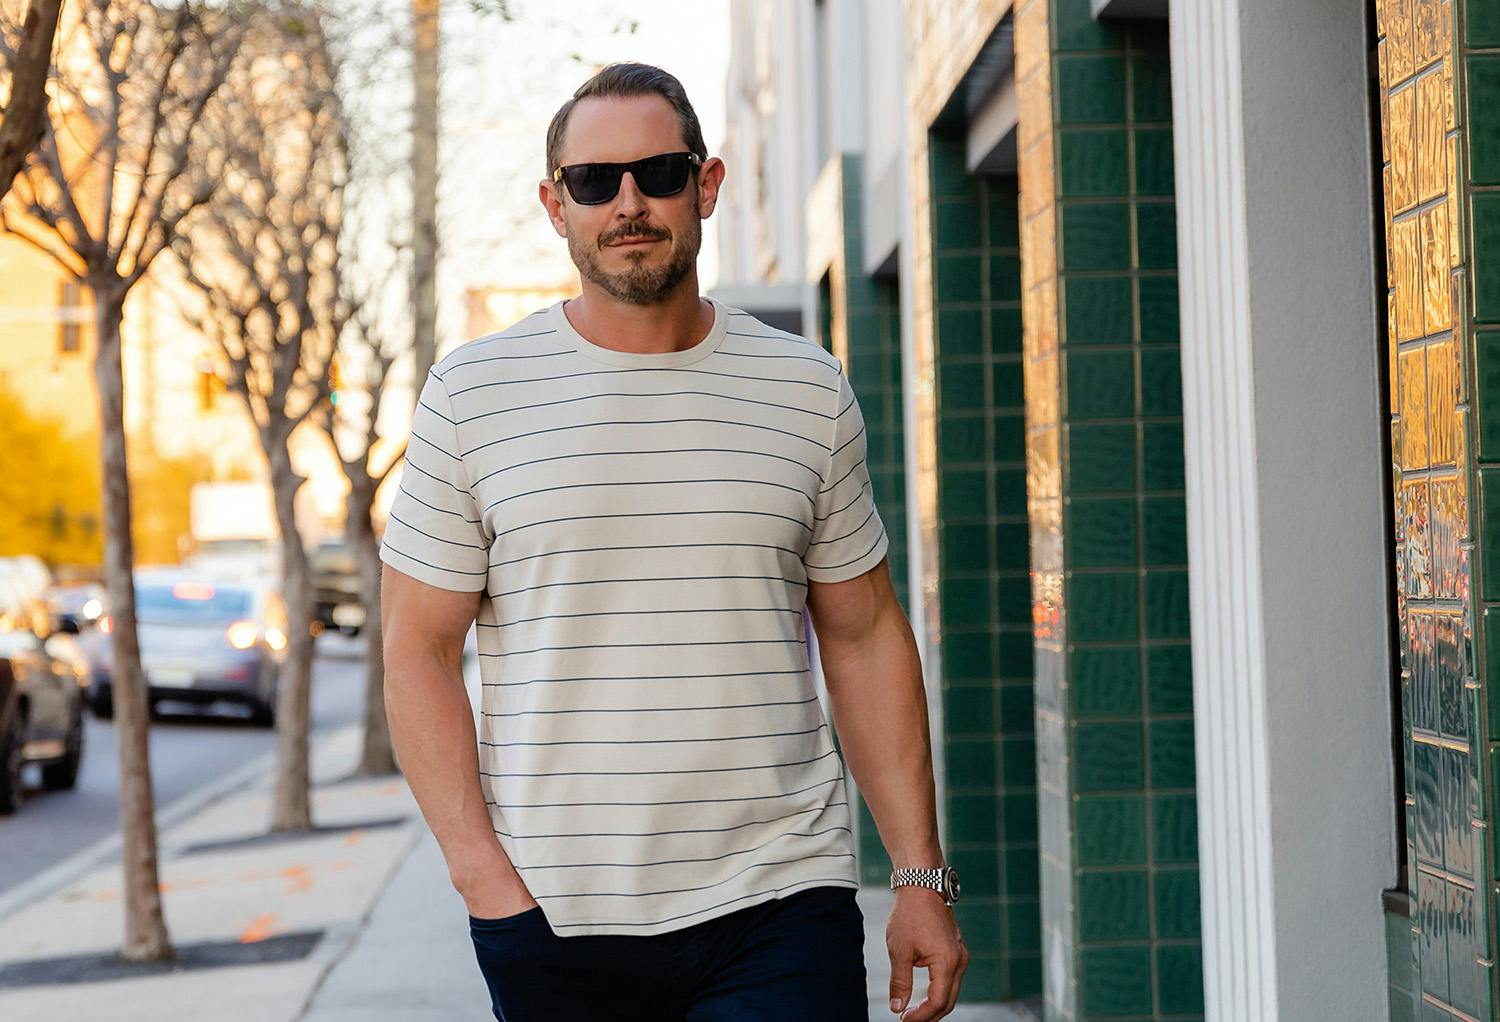 Man Walking with Sunglasses and a Striped Shirt